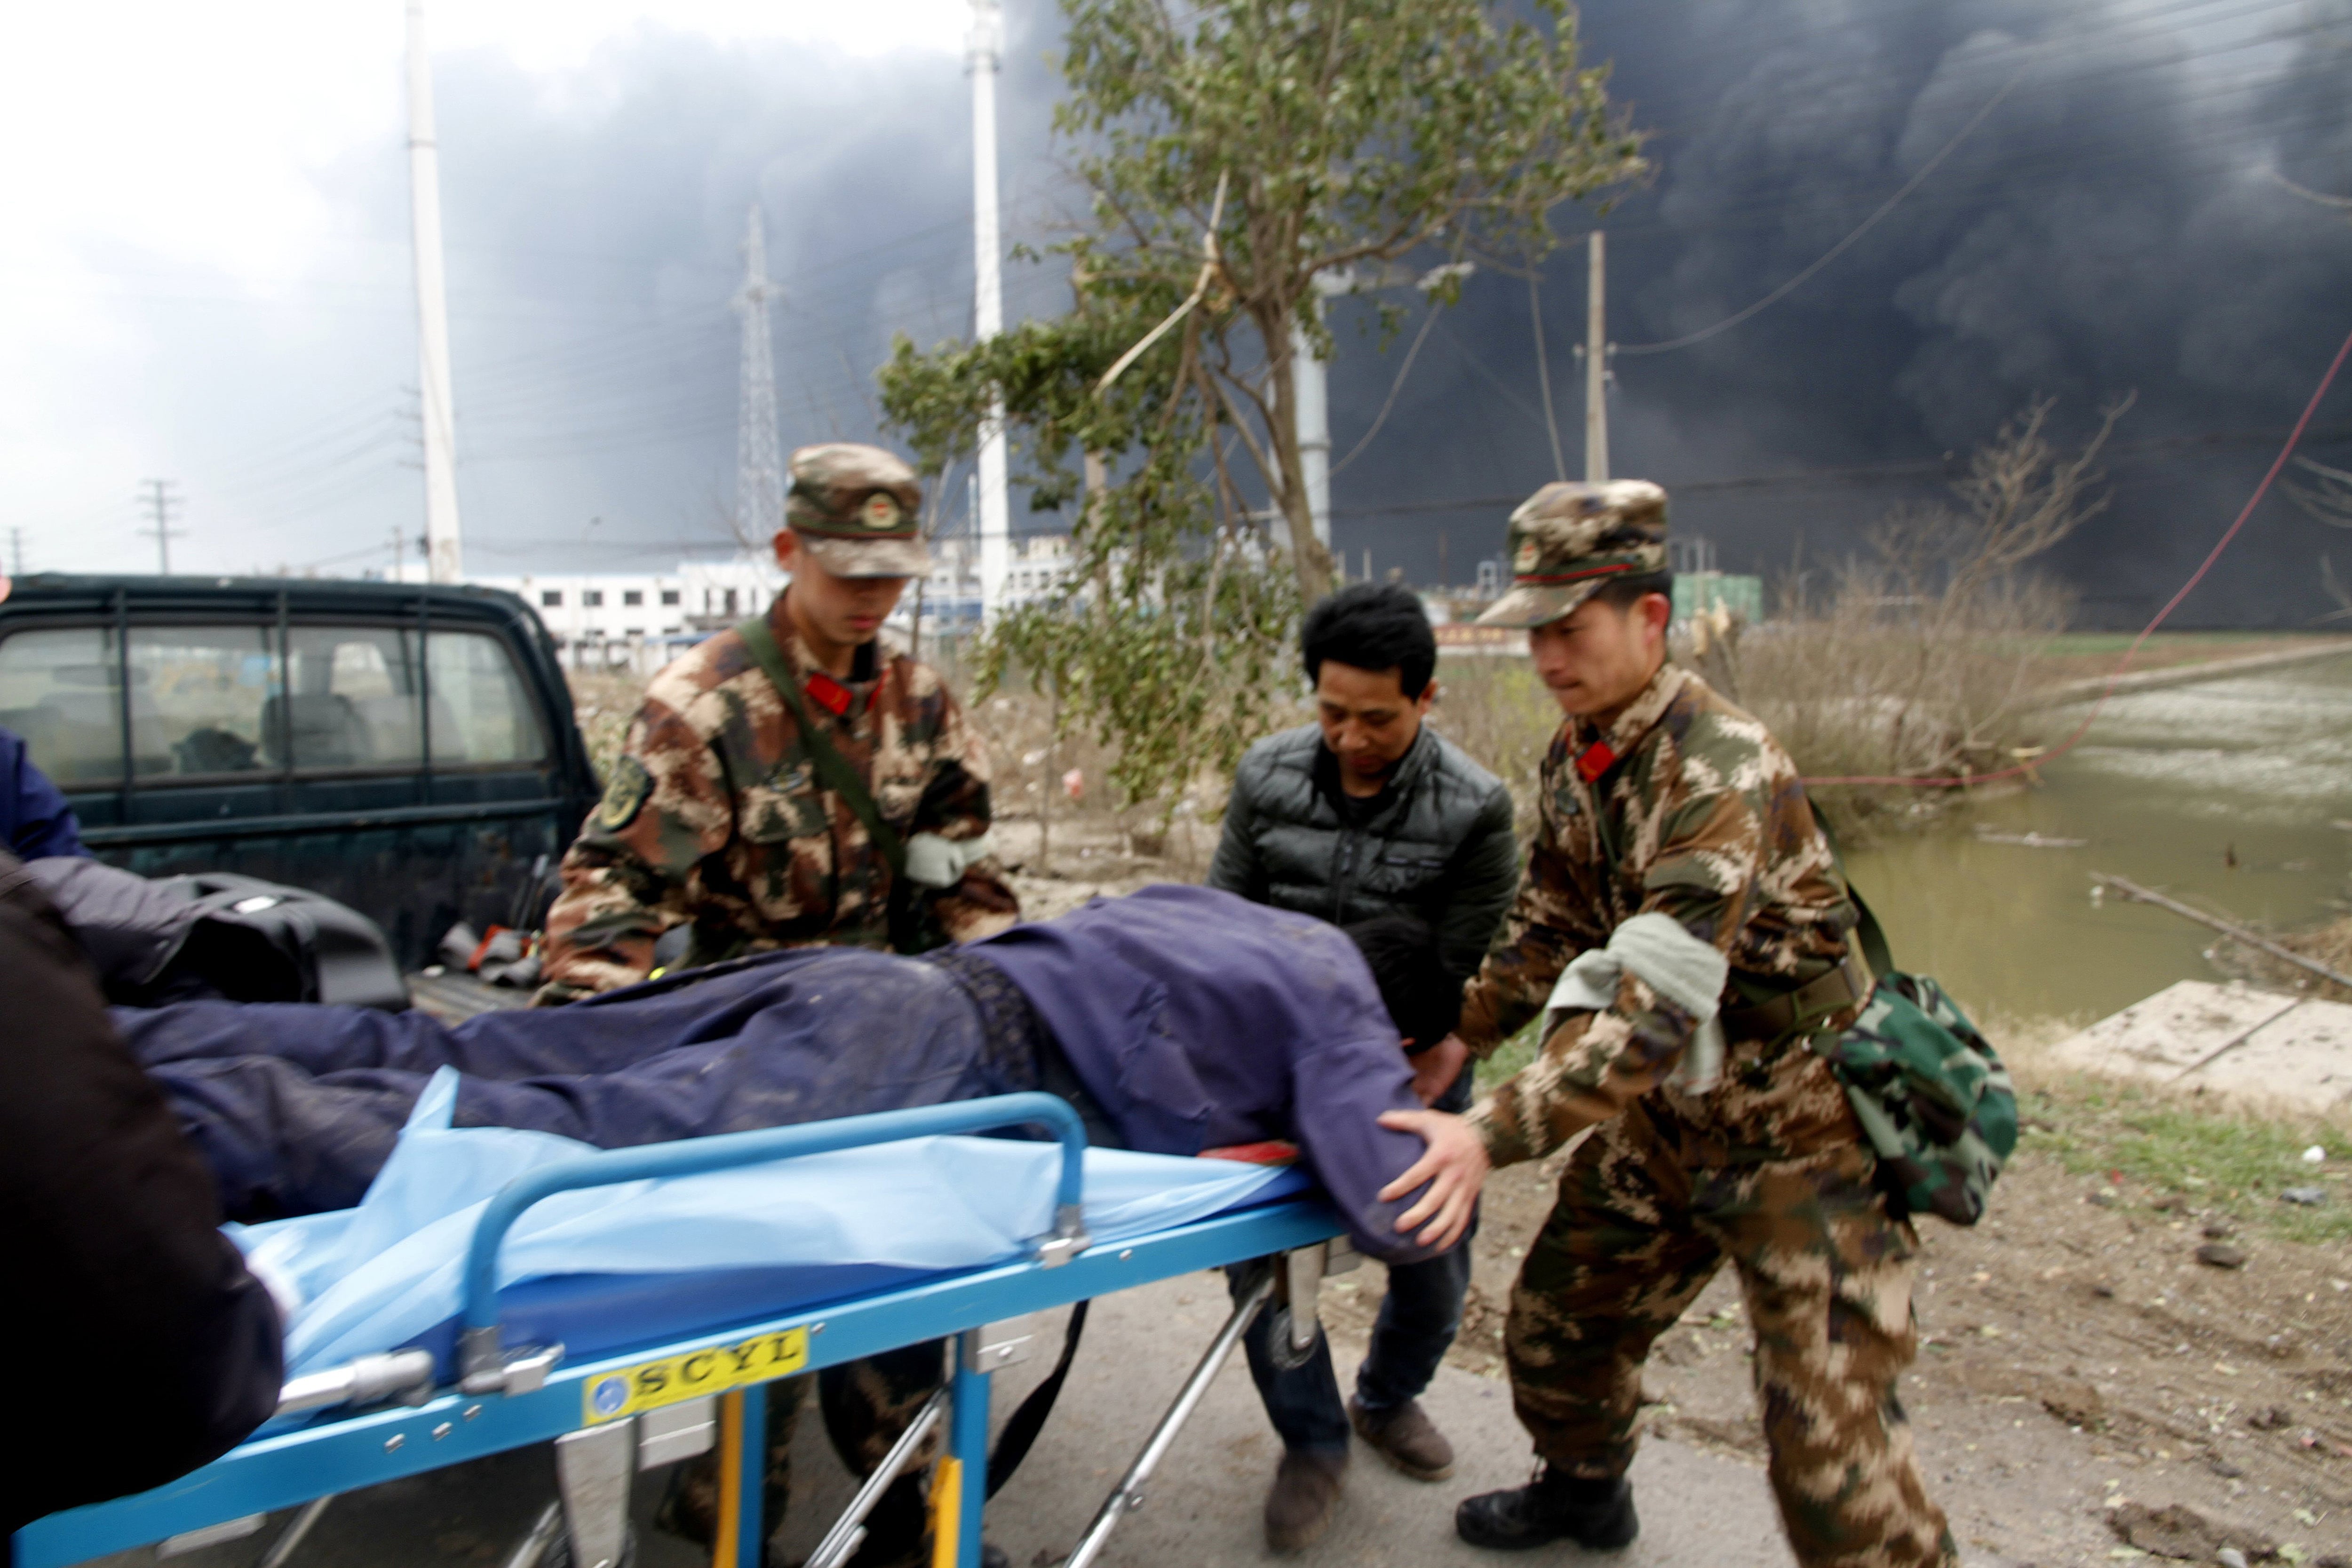 In this Thursday, March 21, 2019, photo, rescuers transport an injured person near the site of a factory explosion in a chemical industrial park in Xiangshui County of Yancheng in eastern China's Jiangsu province. The local government reports the death toll in an explosion at a chemical plant in eastern China has risen with dozens killed and more seriously injured.